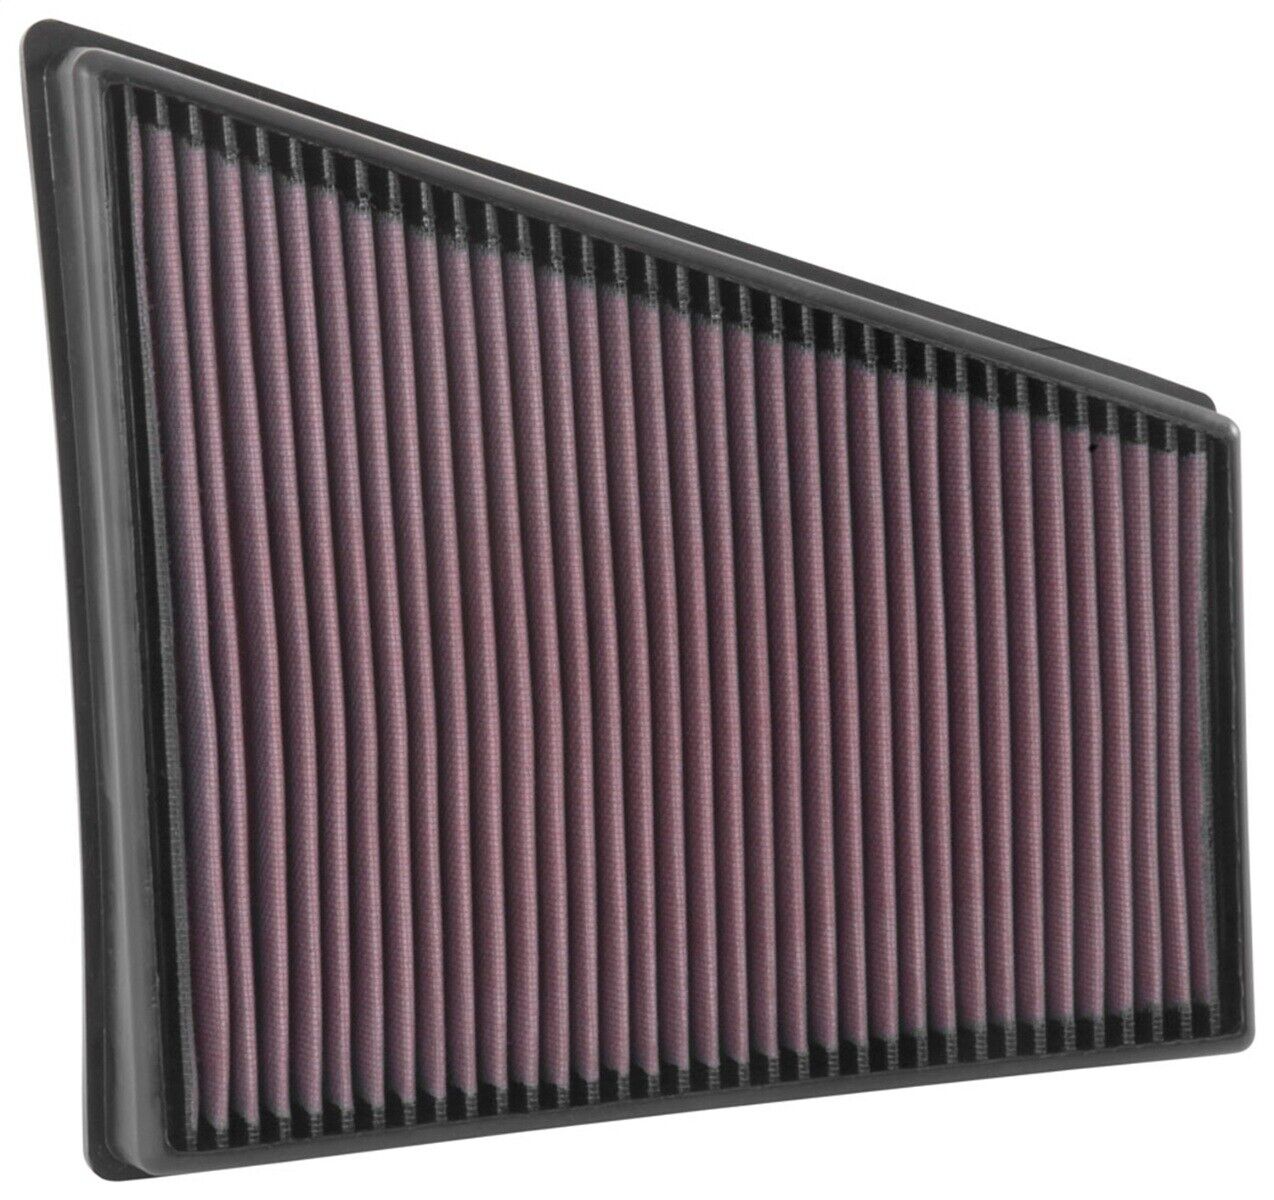 K&N Filters 33-3078 Air Filter Fits 17-22 718 Boxster 718 Cayman